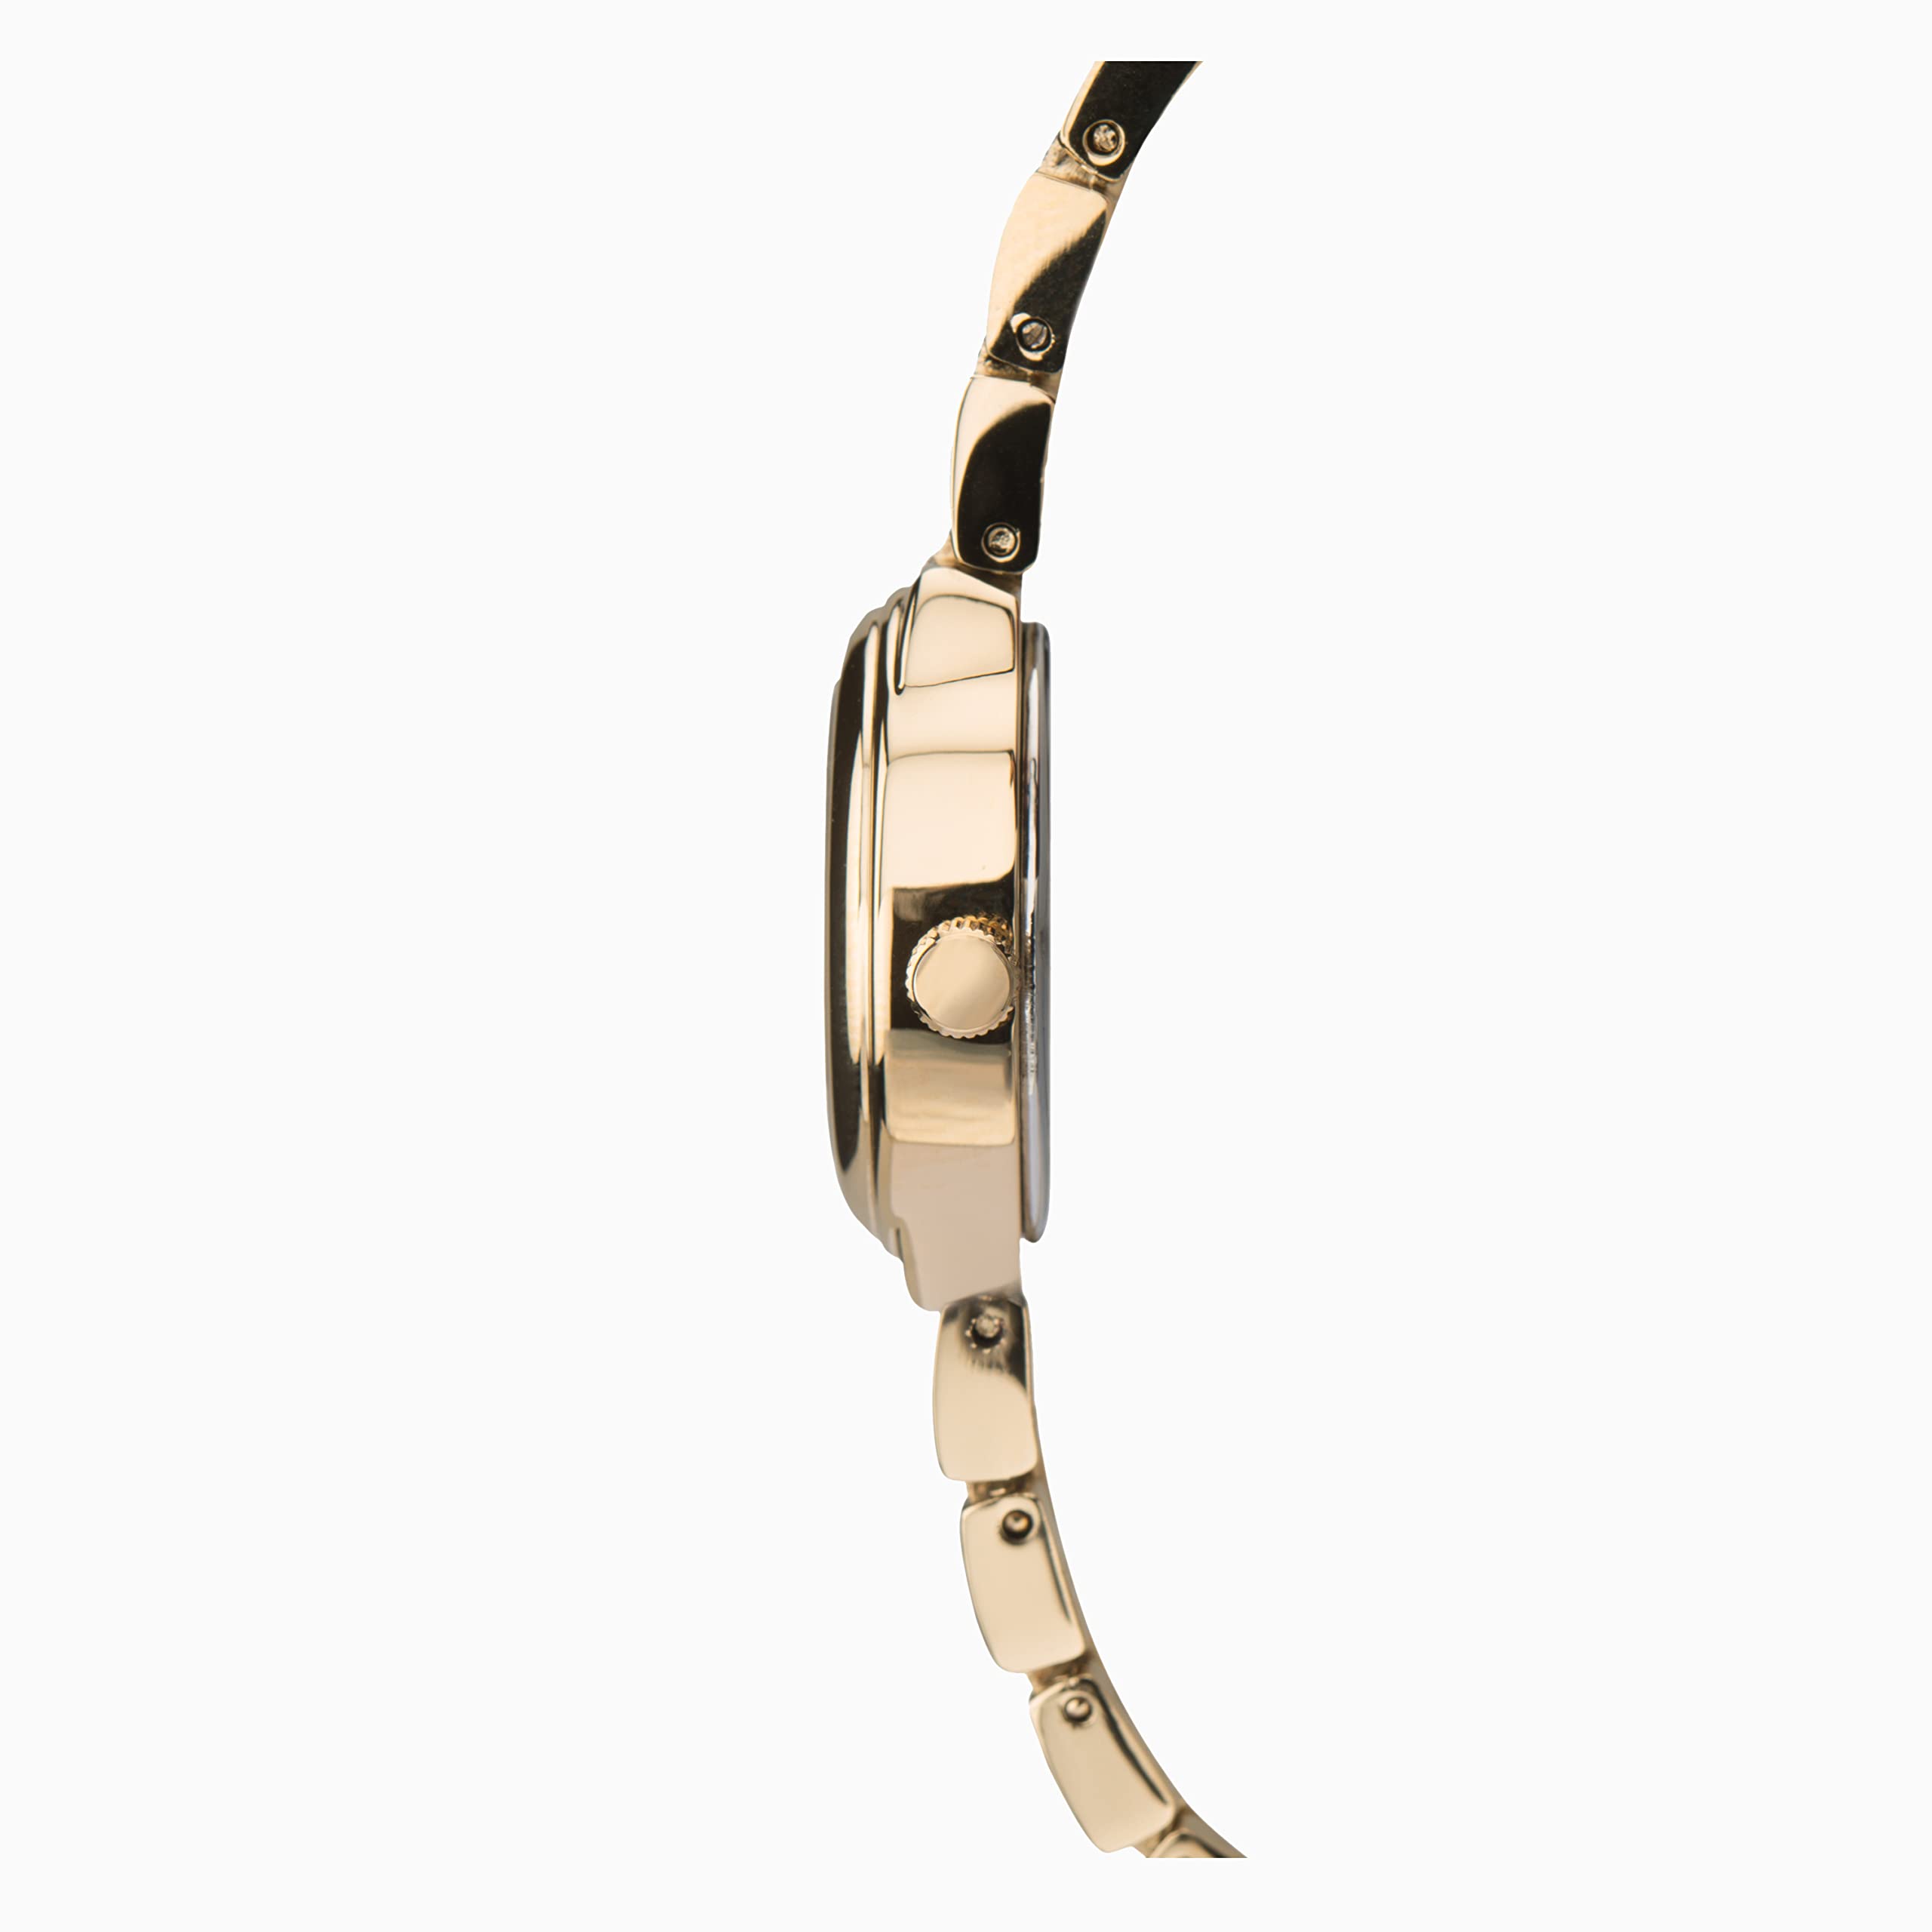 Sekonda 18mm Women's Quartz Watch with Oval Mother of Pearl Dial and Gold Alloy Foldover Clasp Bracelet